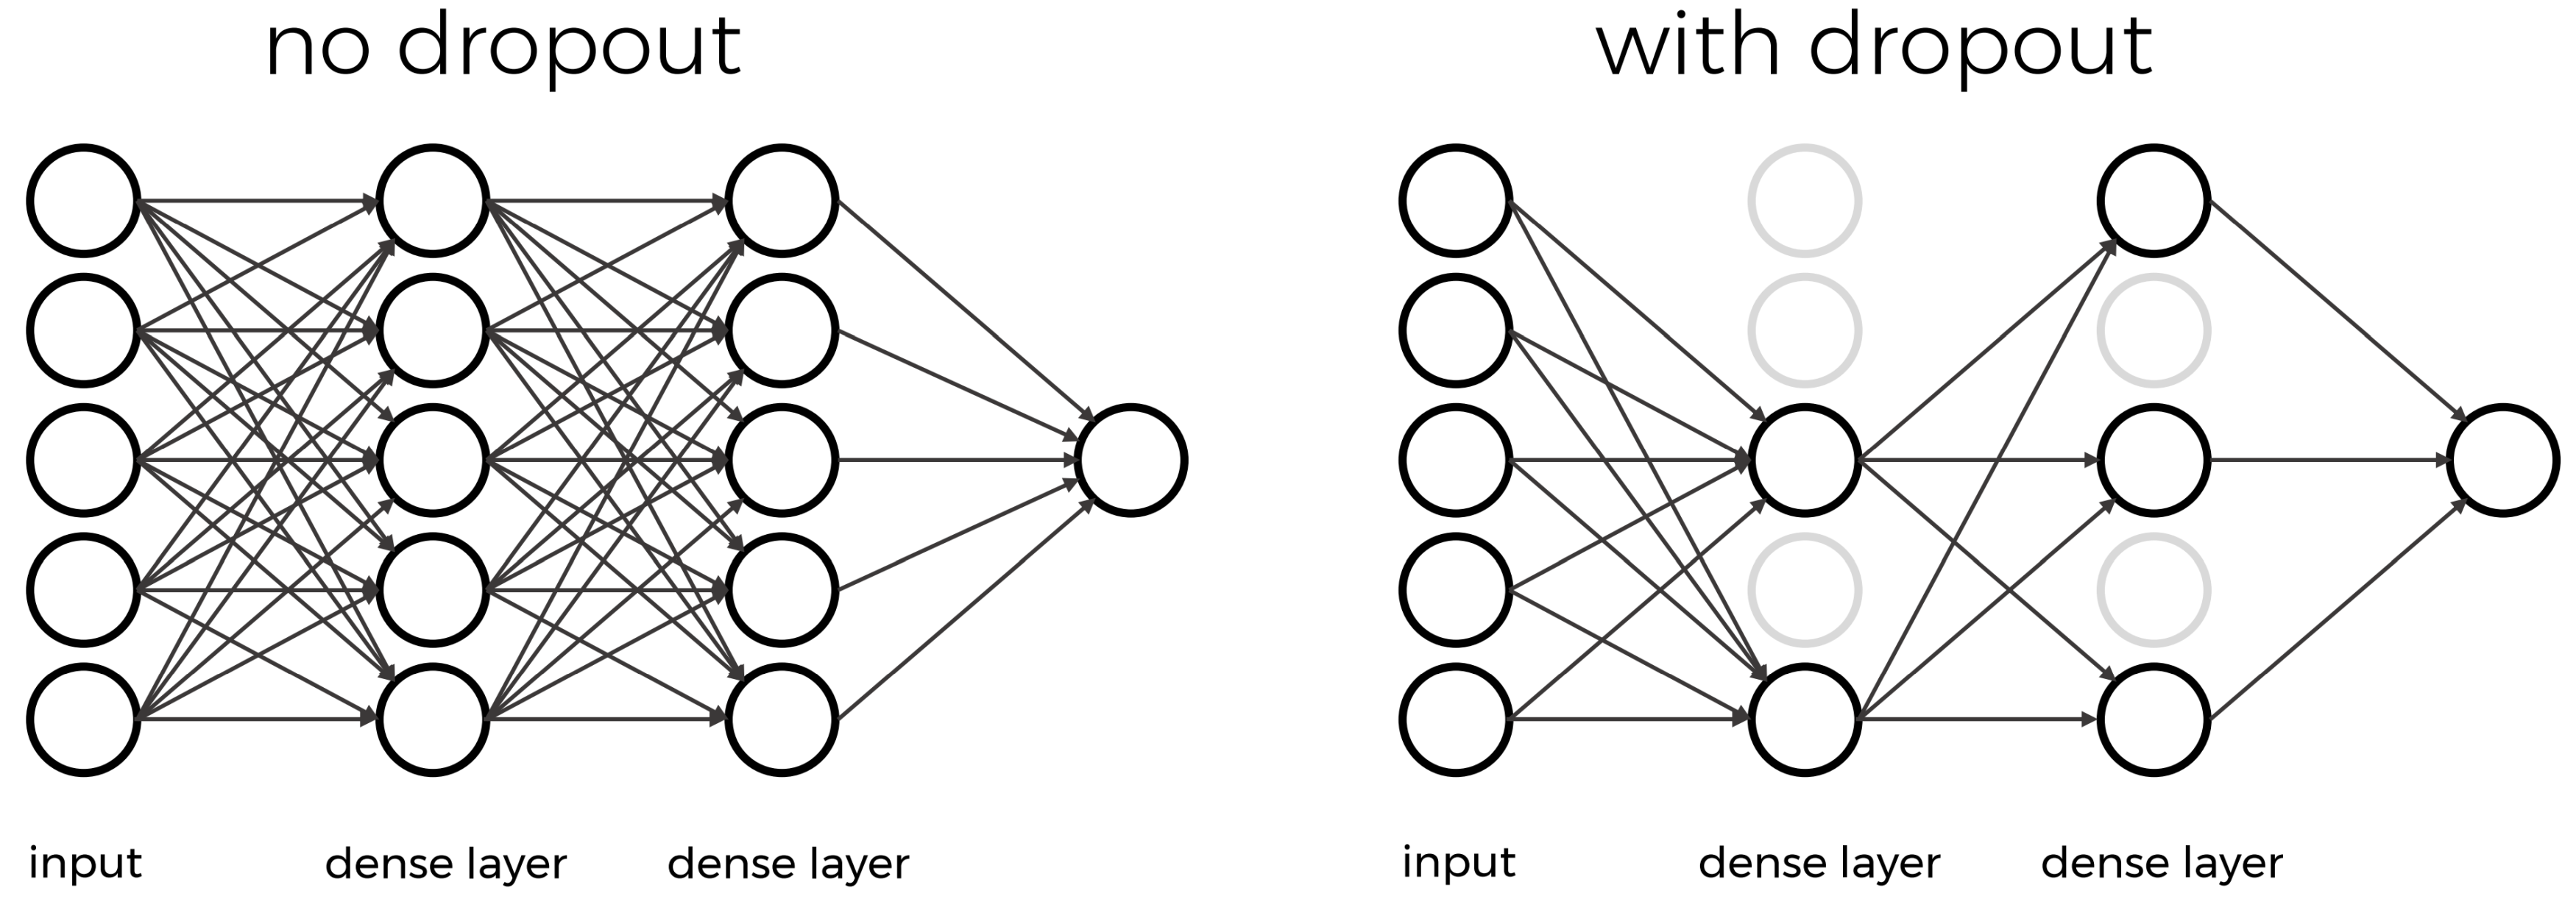 A sketch of a neural network with and without dropout